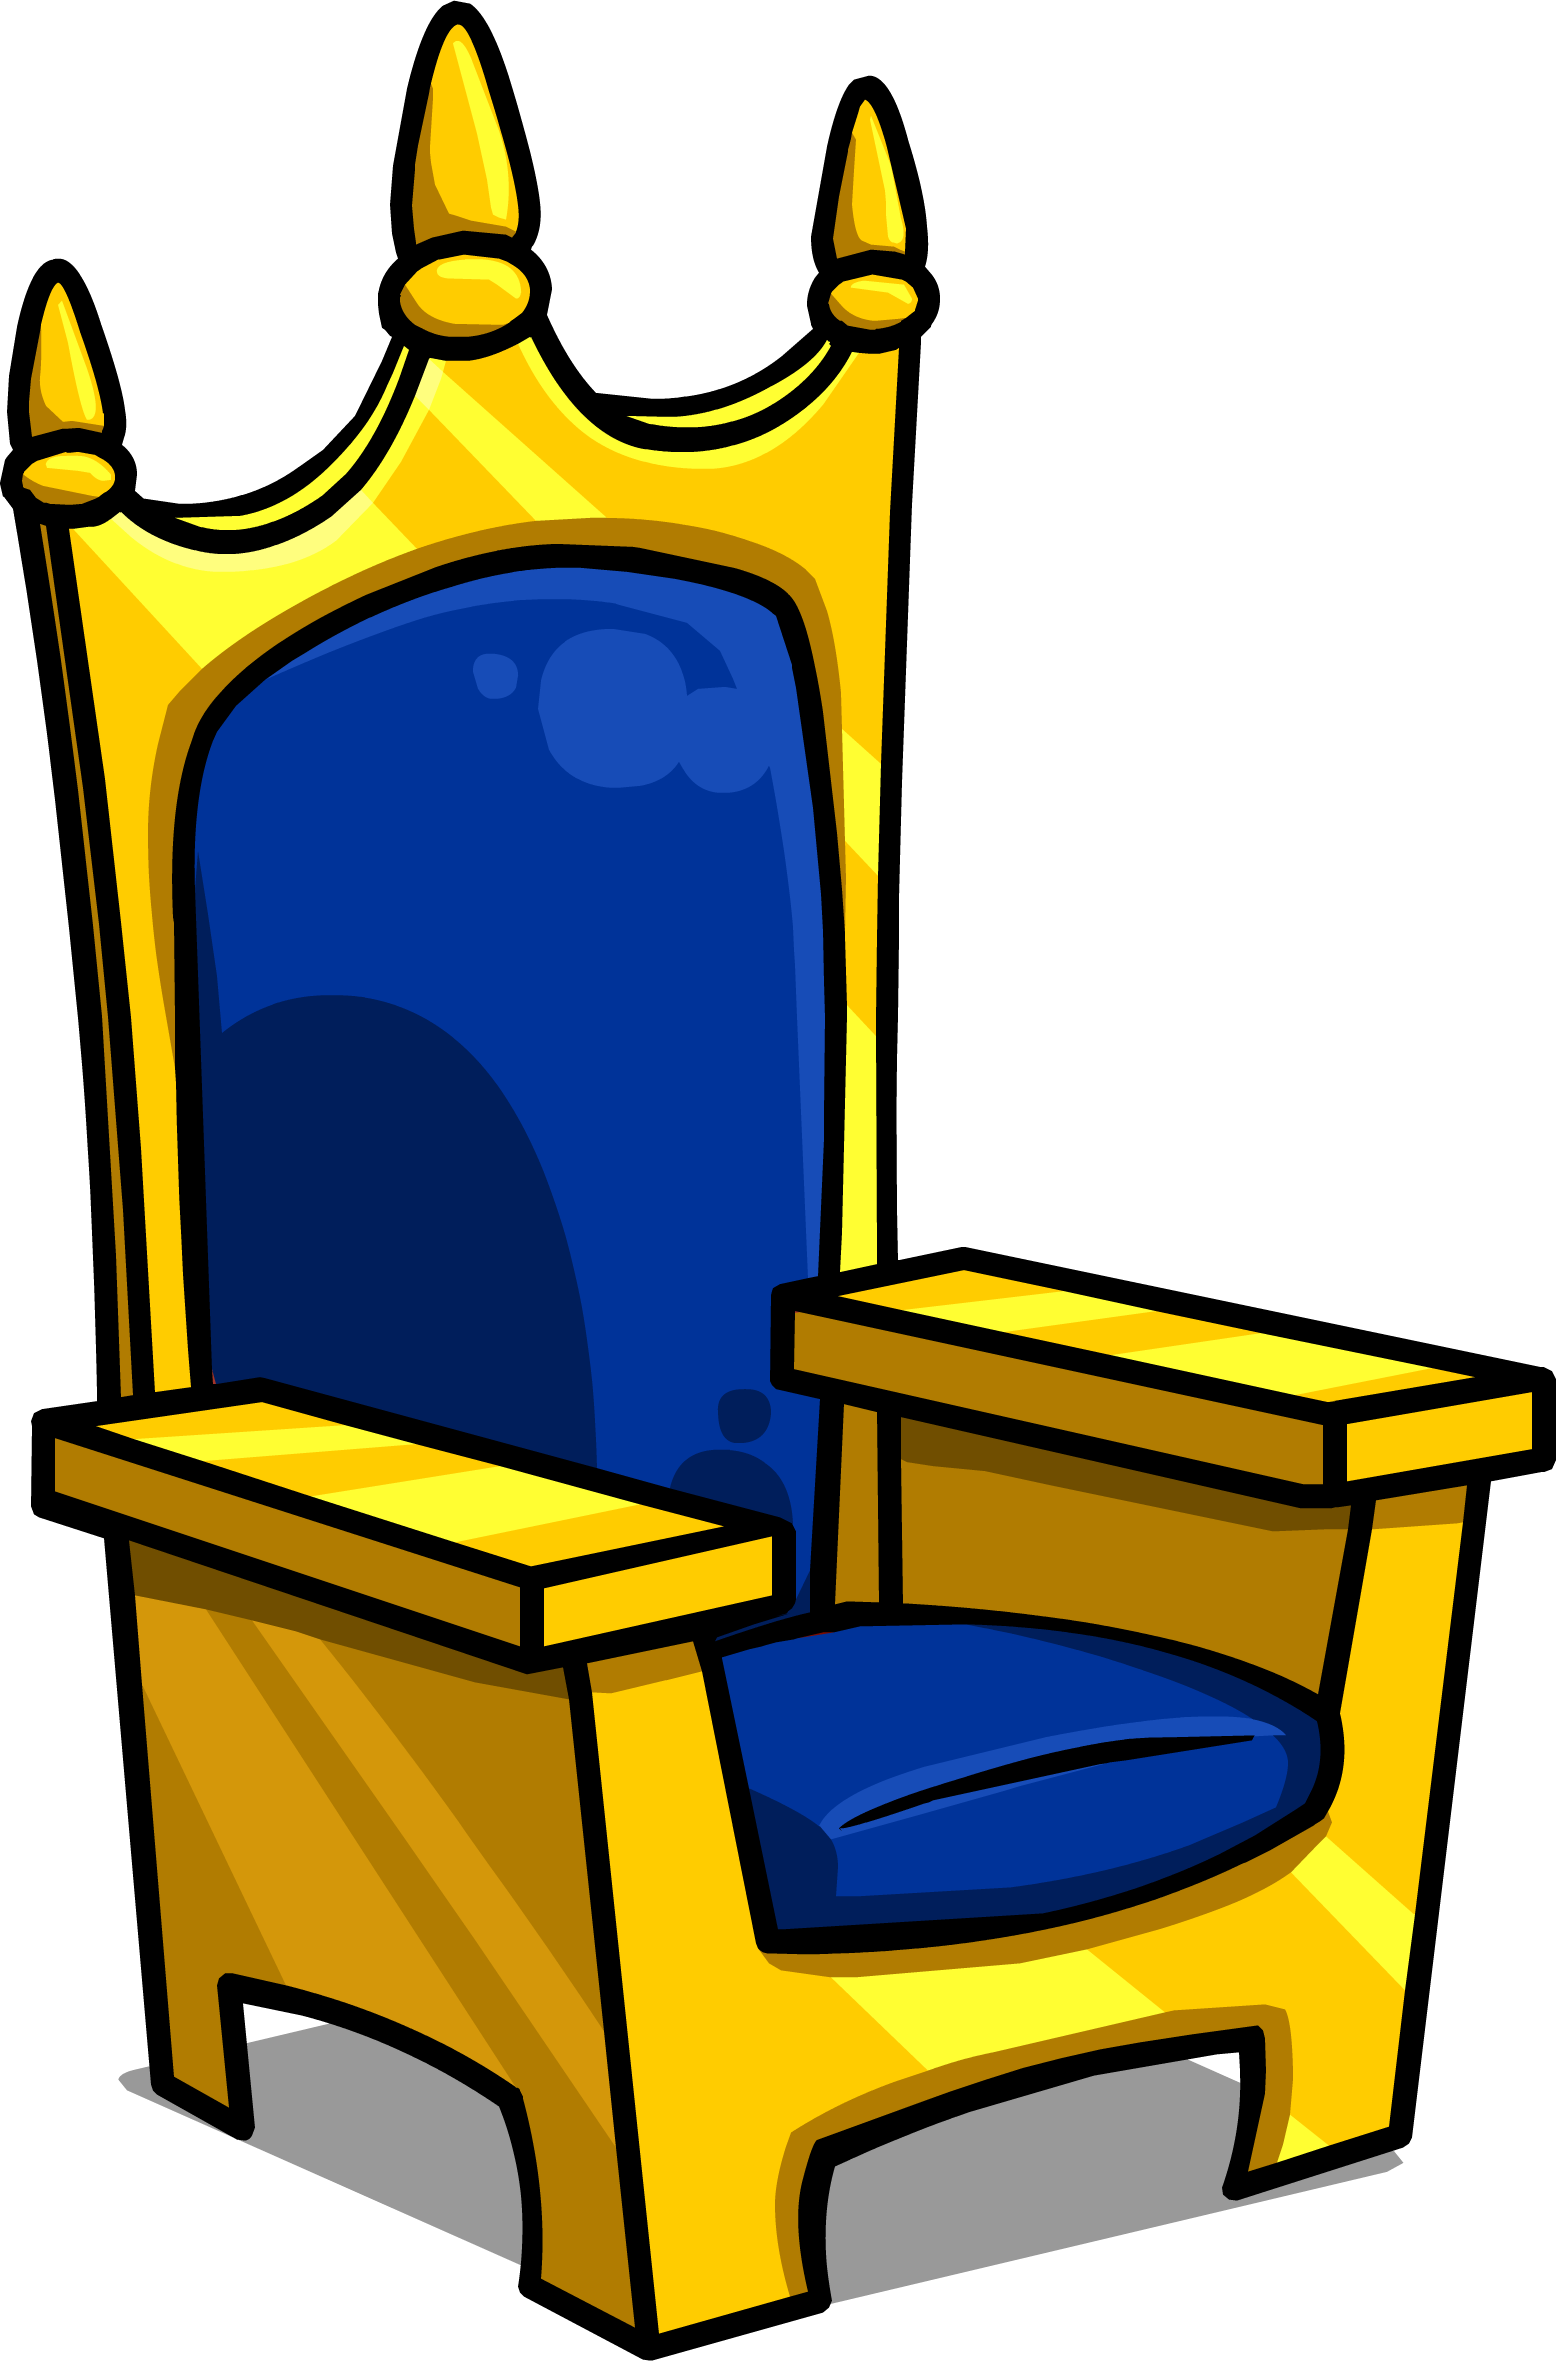 Swim Team Clipart Download - Throne - (1556x2361) Png Clipart Download. 